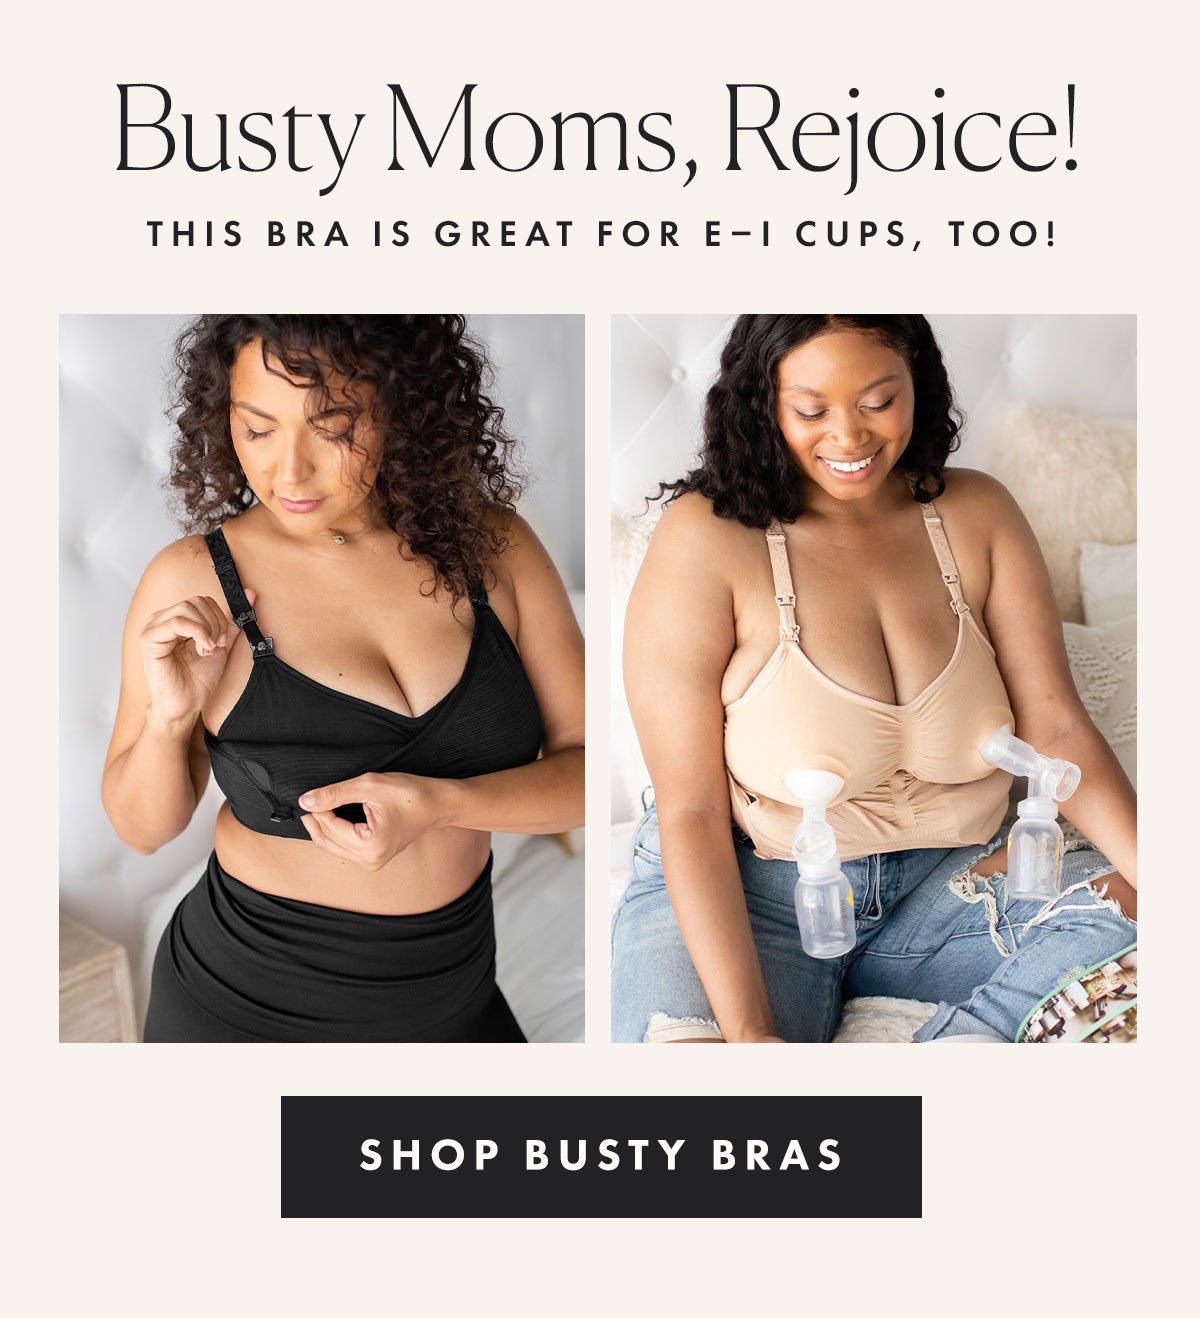 Busty moms, rejoice! This bra is great for E-I cups, too!